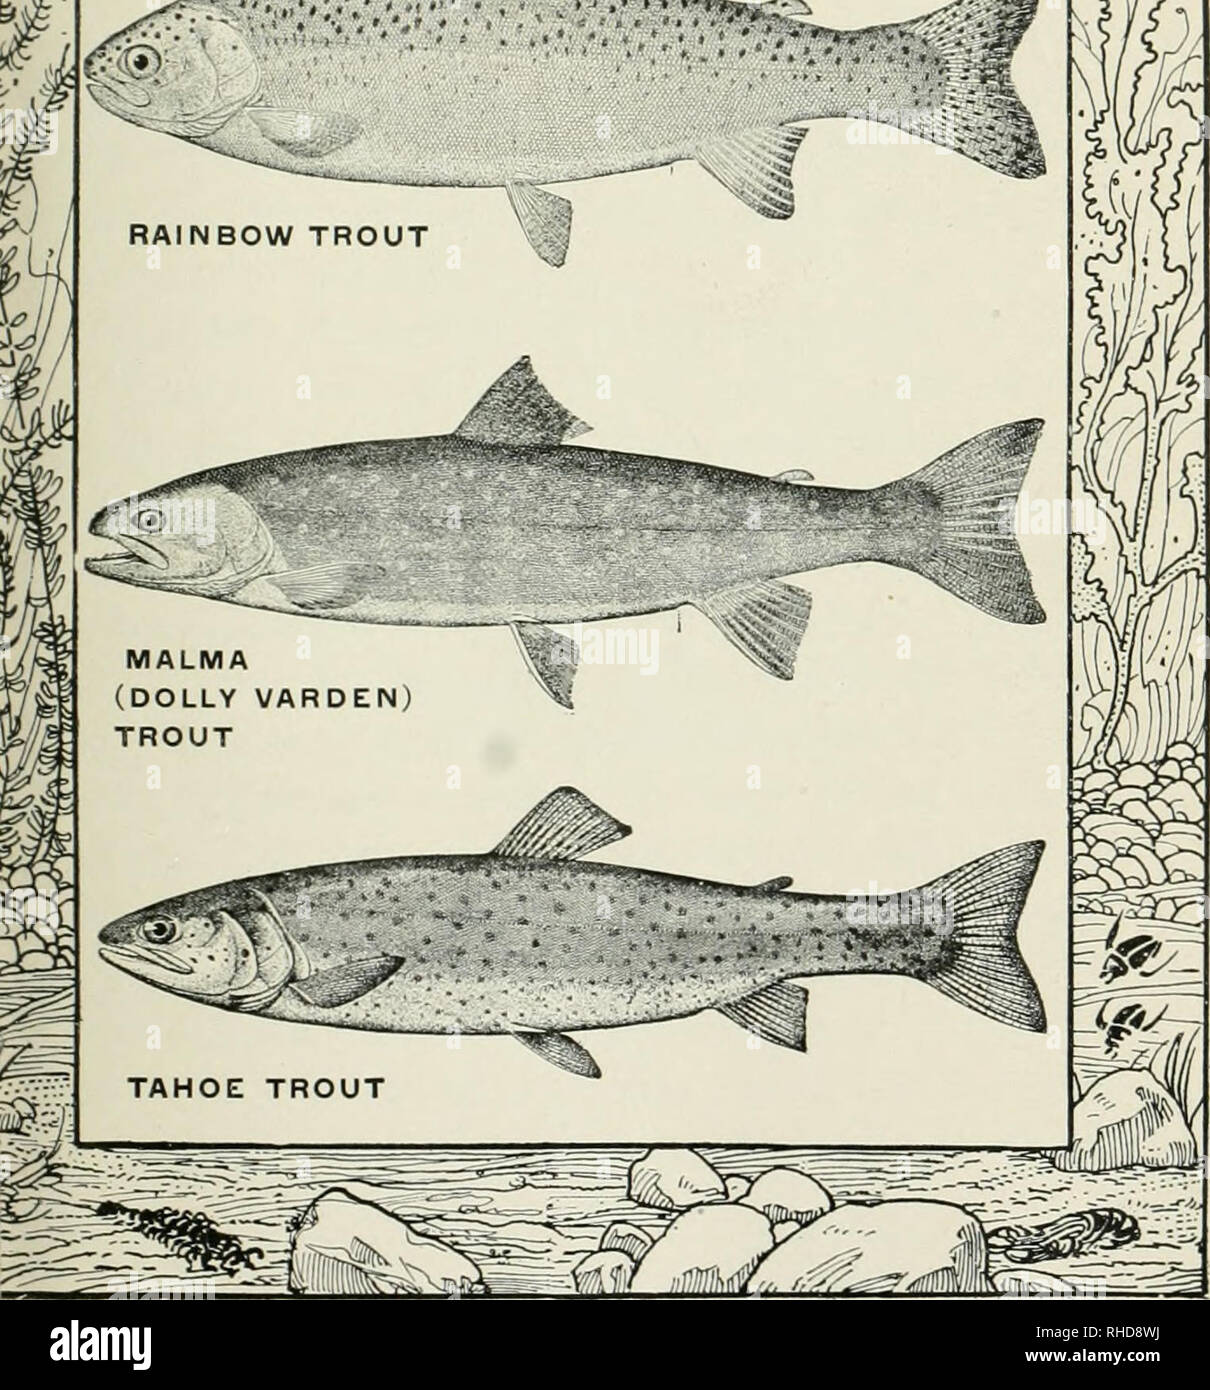 The book of fish and fishing : a complete compendium of practical advice to  guide those who angle for all fishes in fresh and salt water. Fishing.  POPULAR FRESH-WATER GAME FISH.